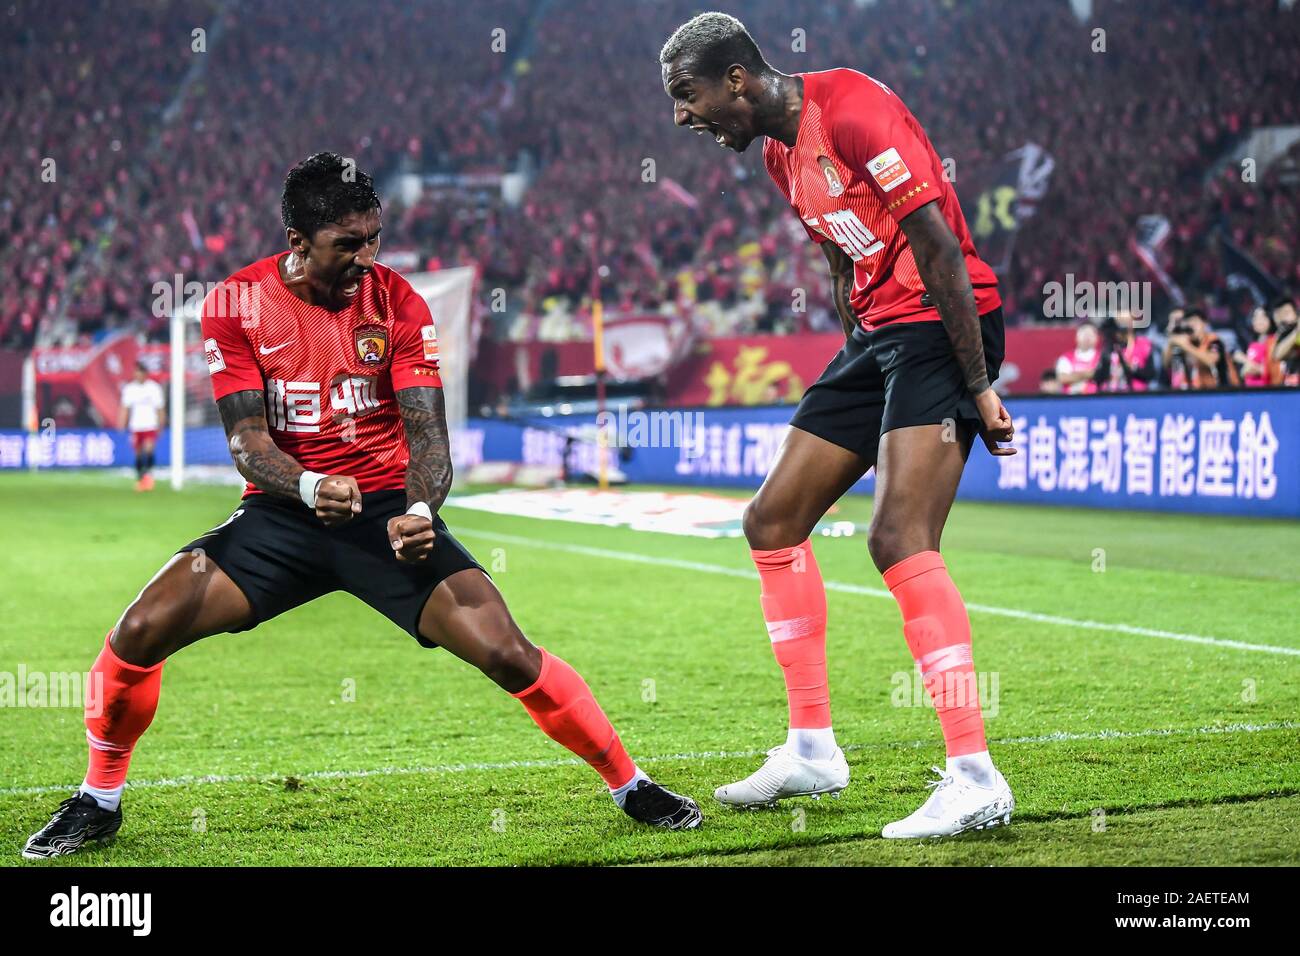 Brazilian football player Paulinho, left, and Brazilian football player Anderson Souza Conceicao, known as Anderson Talisca or simply Talisca, right, Stock Photo